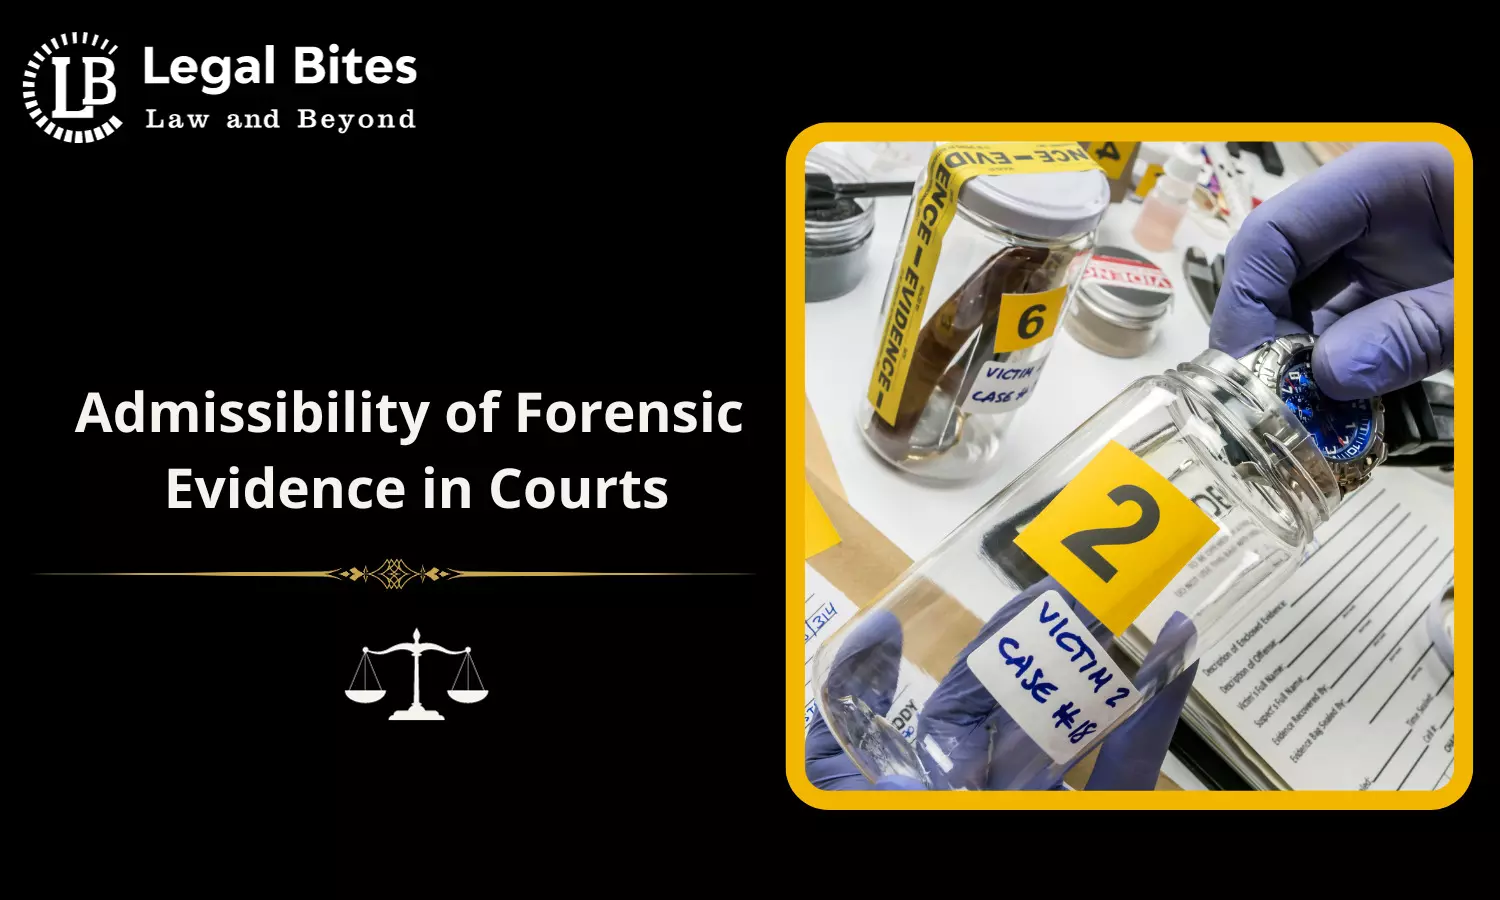 Admissibility of Forensic Evidence in Courts